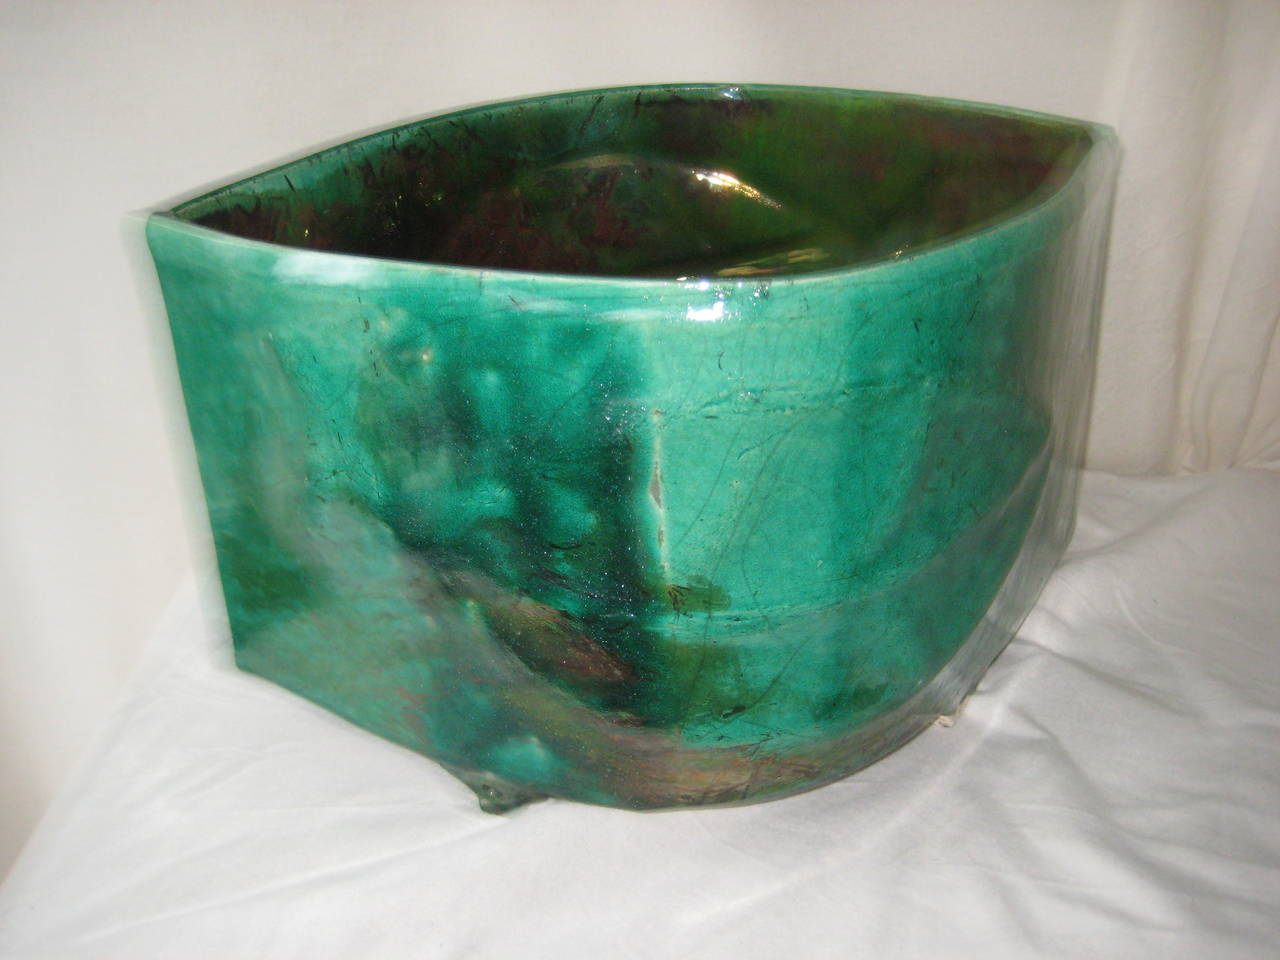 Low fired ceramic of Large green Shaker Leaf by Piero Fenci.
One of a kind ceramic